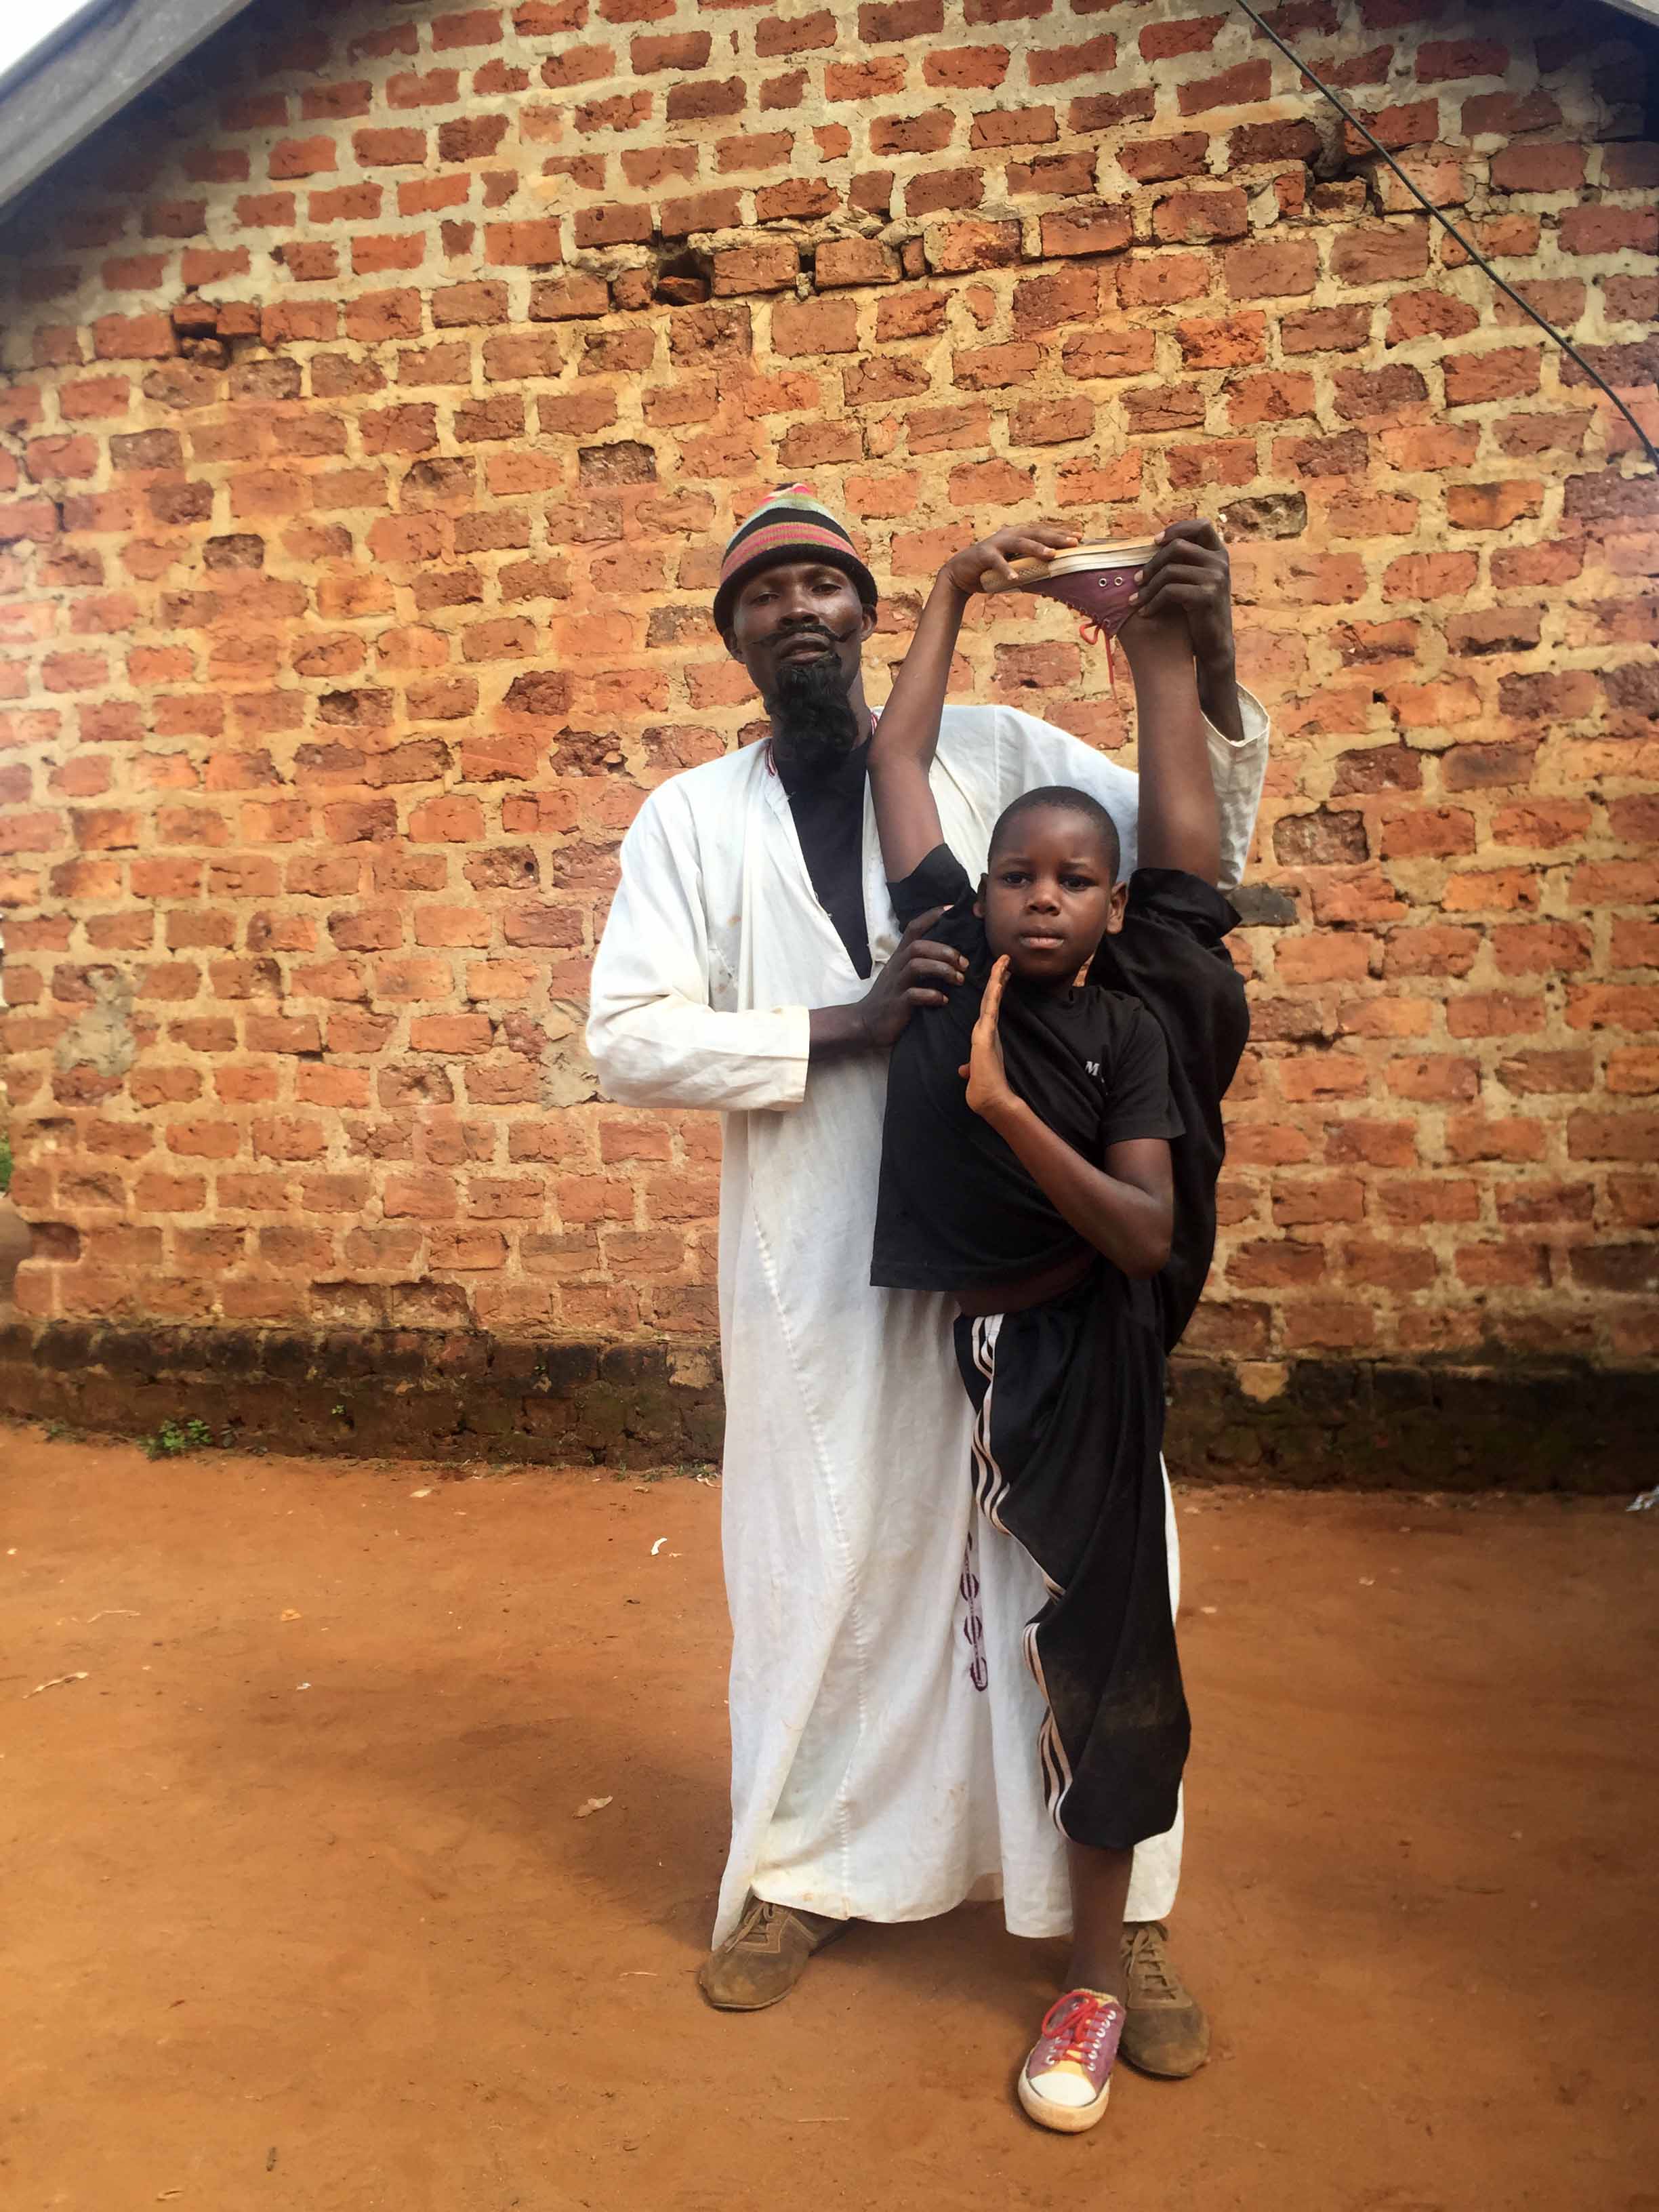 Still from Once Upon a Time in Uganda. A man stands behind and assists a young boy who is standing in a straddle position, standing on one foot with the other foot above his head. Behind them is a brick structure.